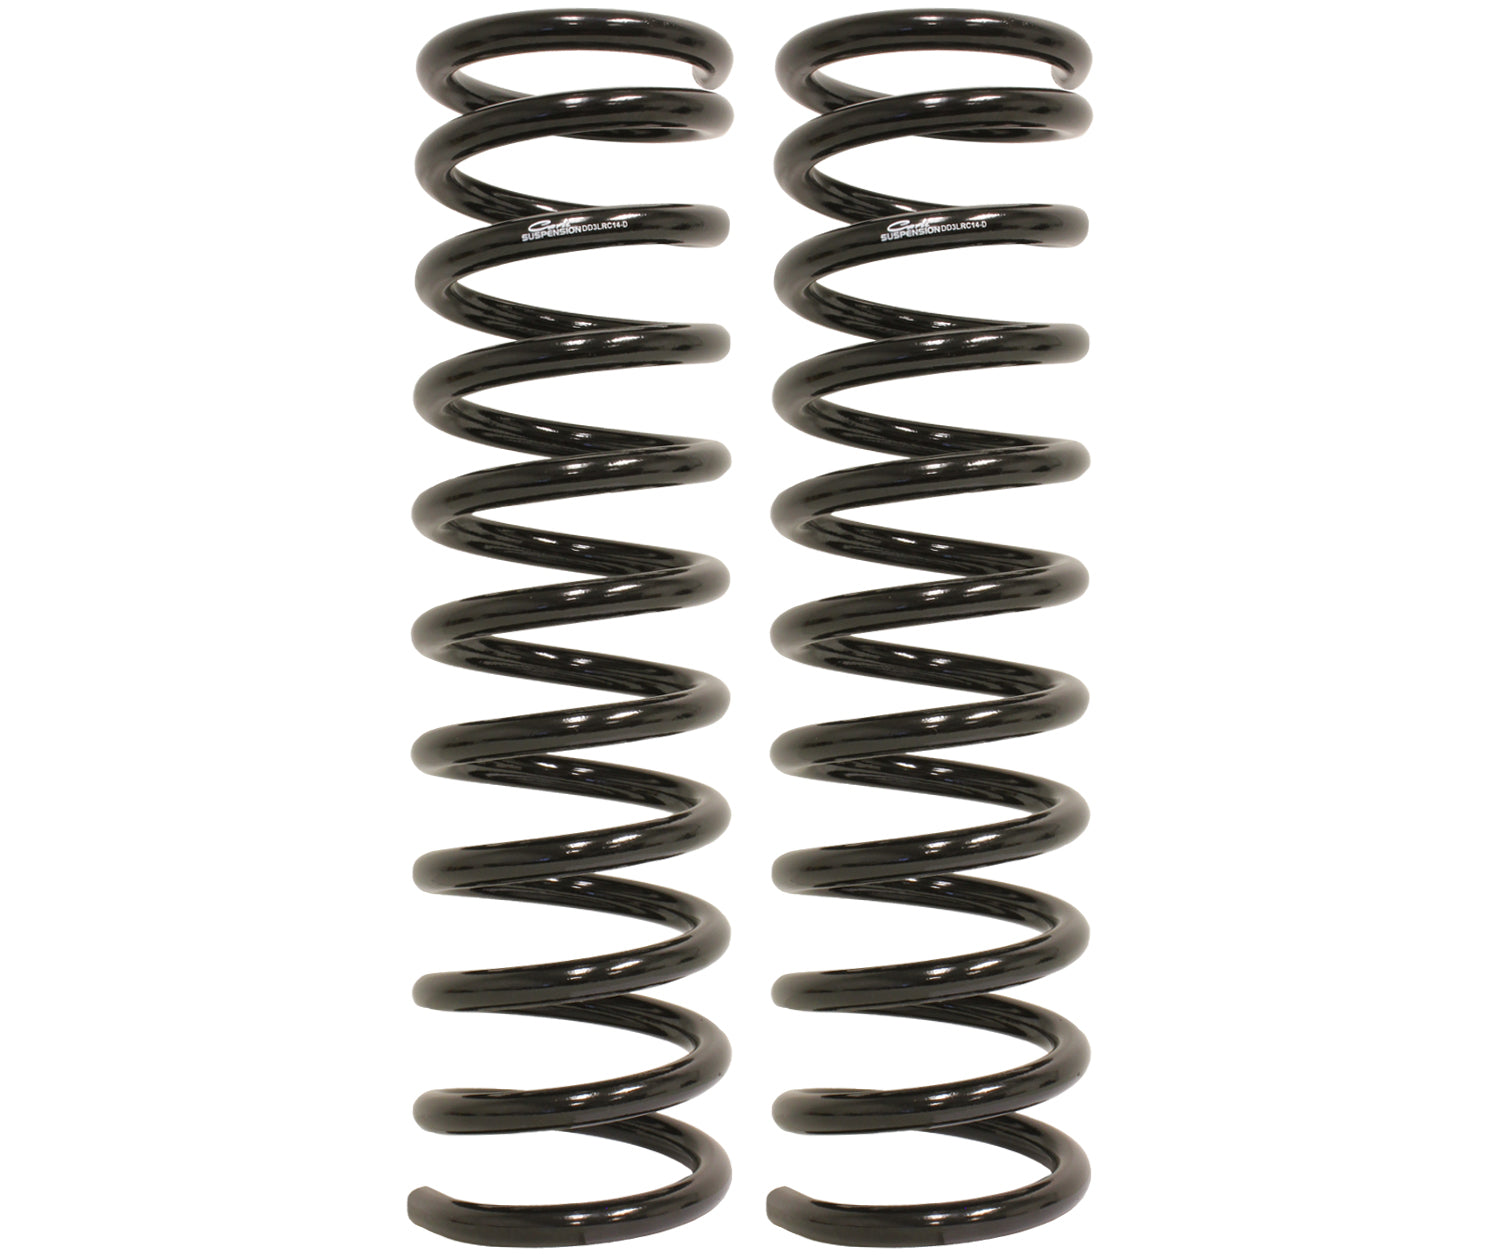 Carli Suspension CS-DLRC-14-H 3 inch Lift Front Linear Rate Coil Springs